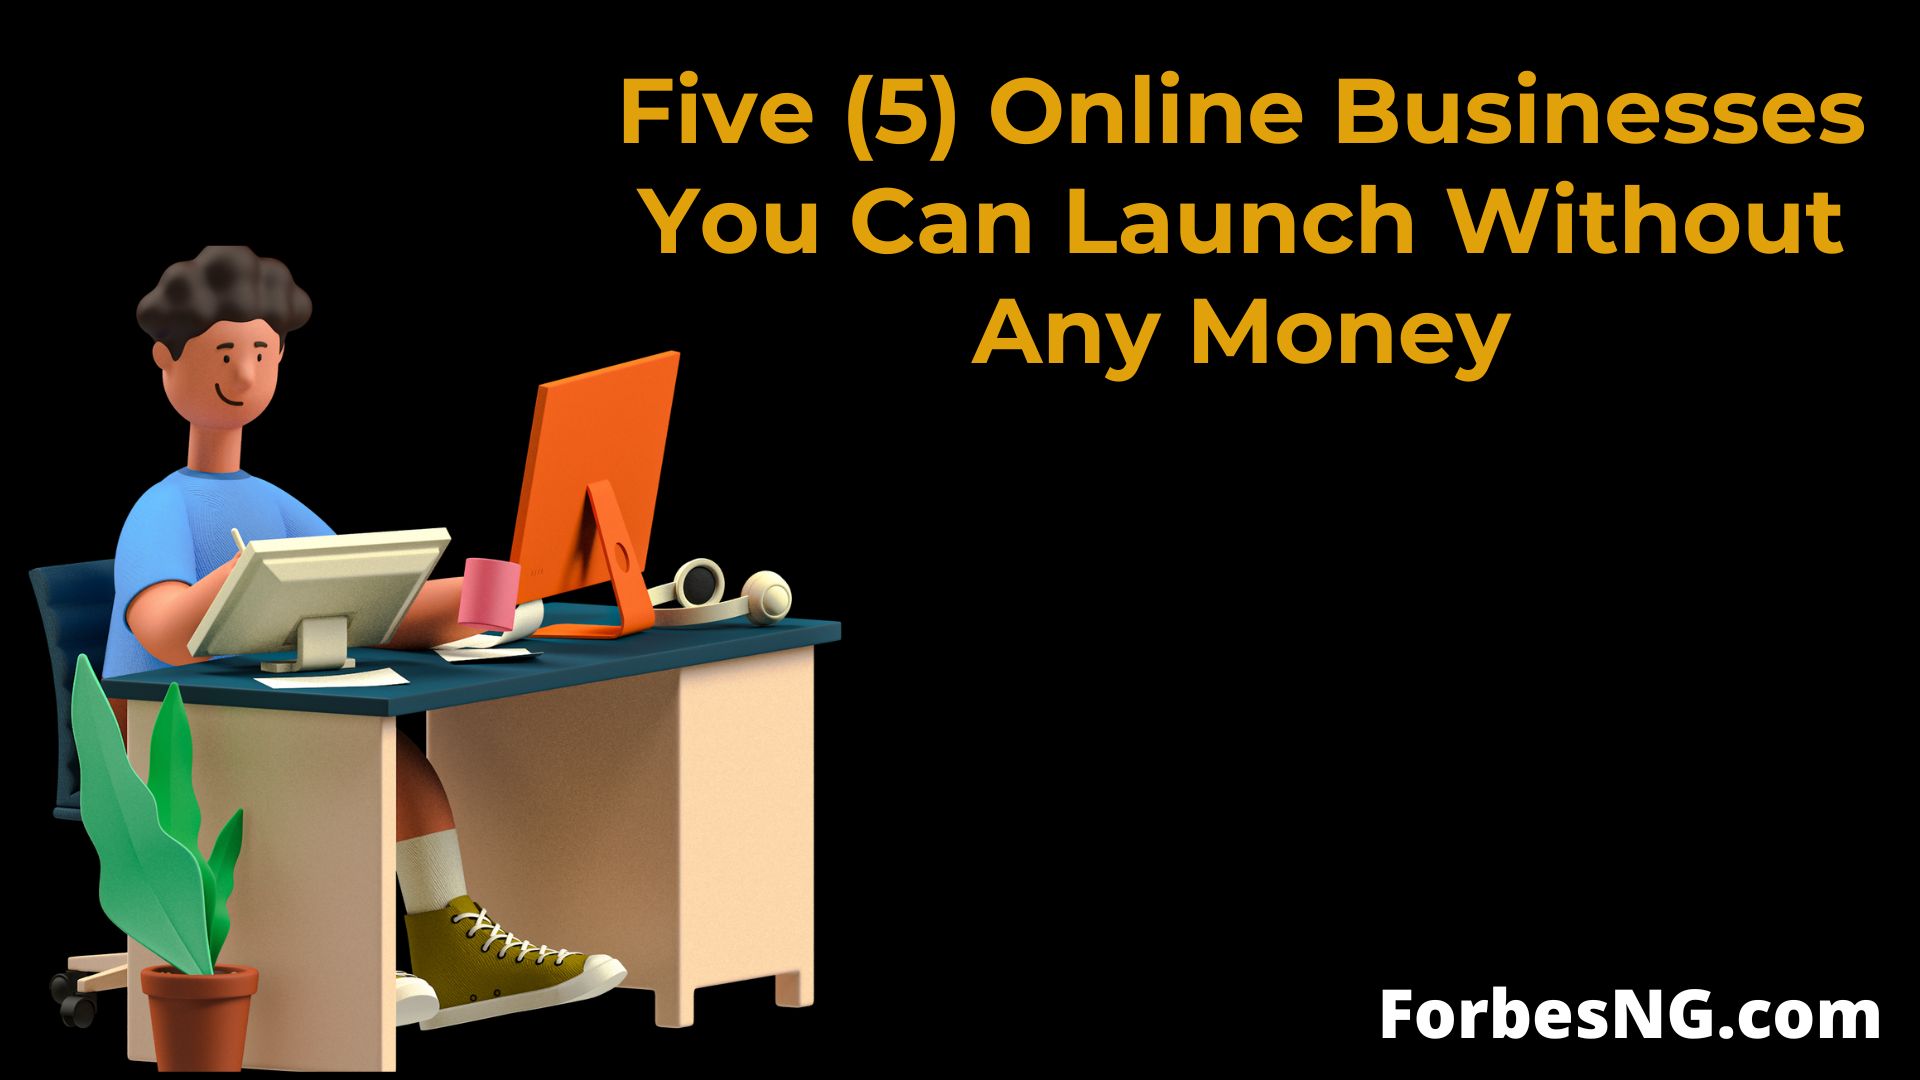 Five (5) Online Businesses You Can Launch Without Any Money